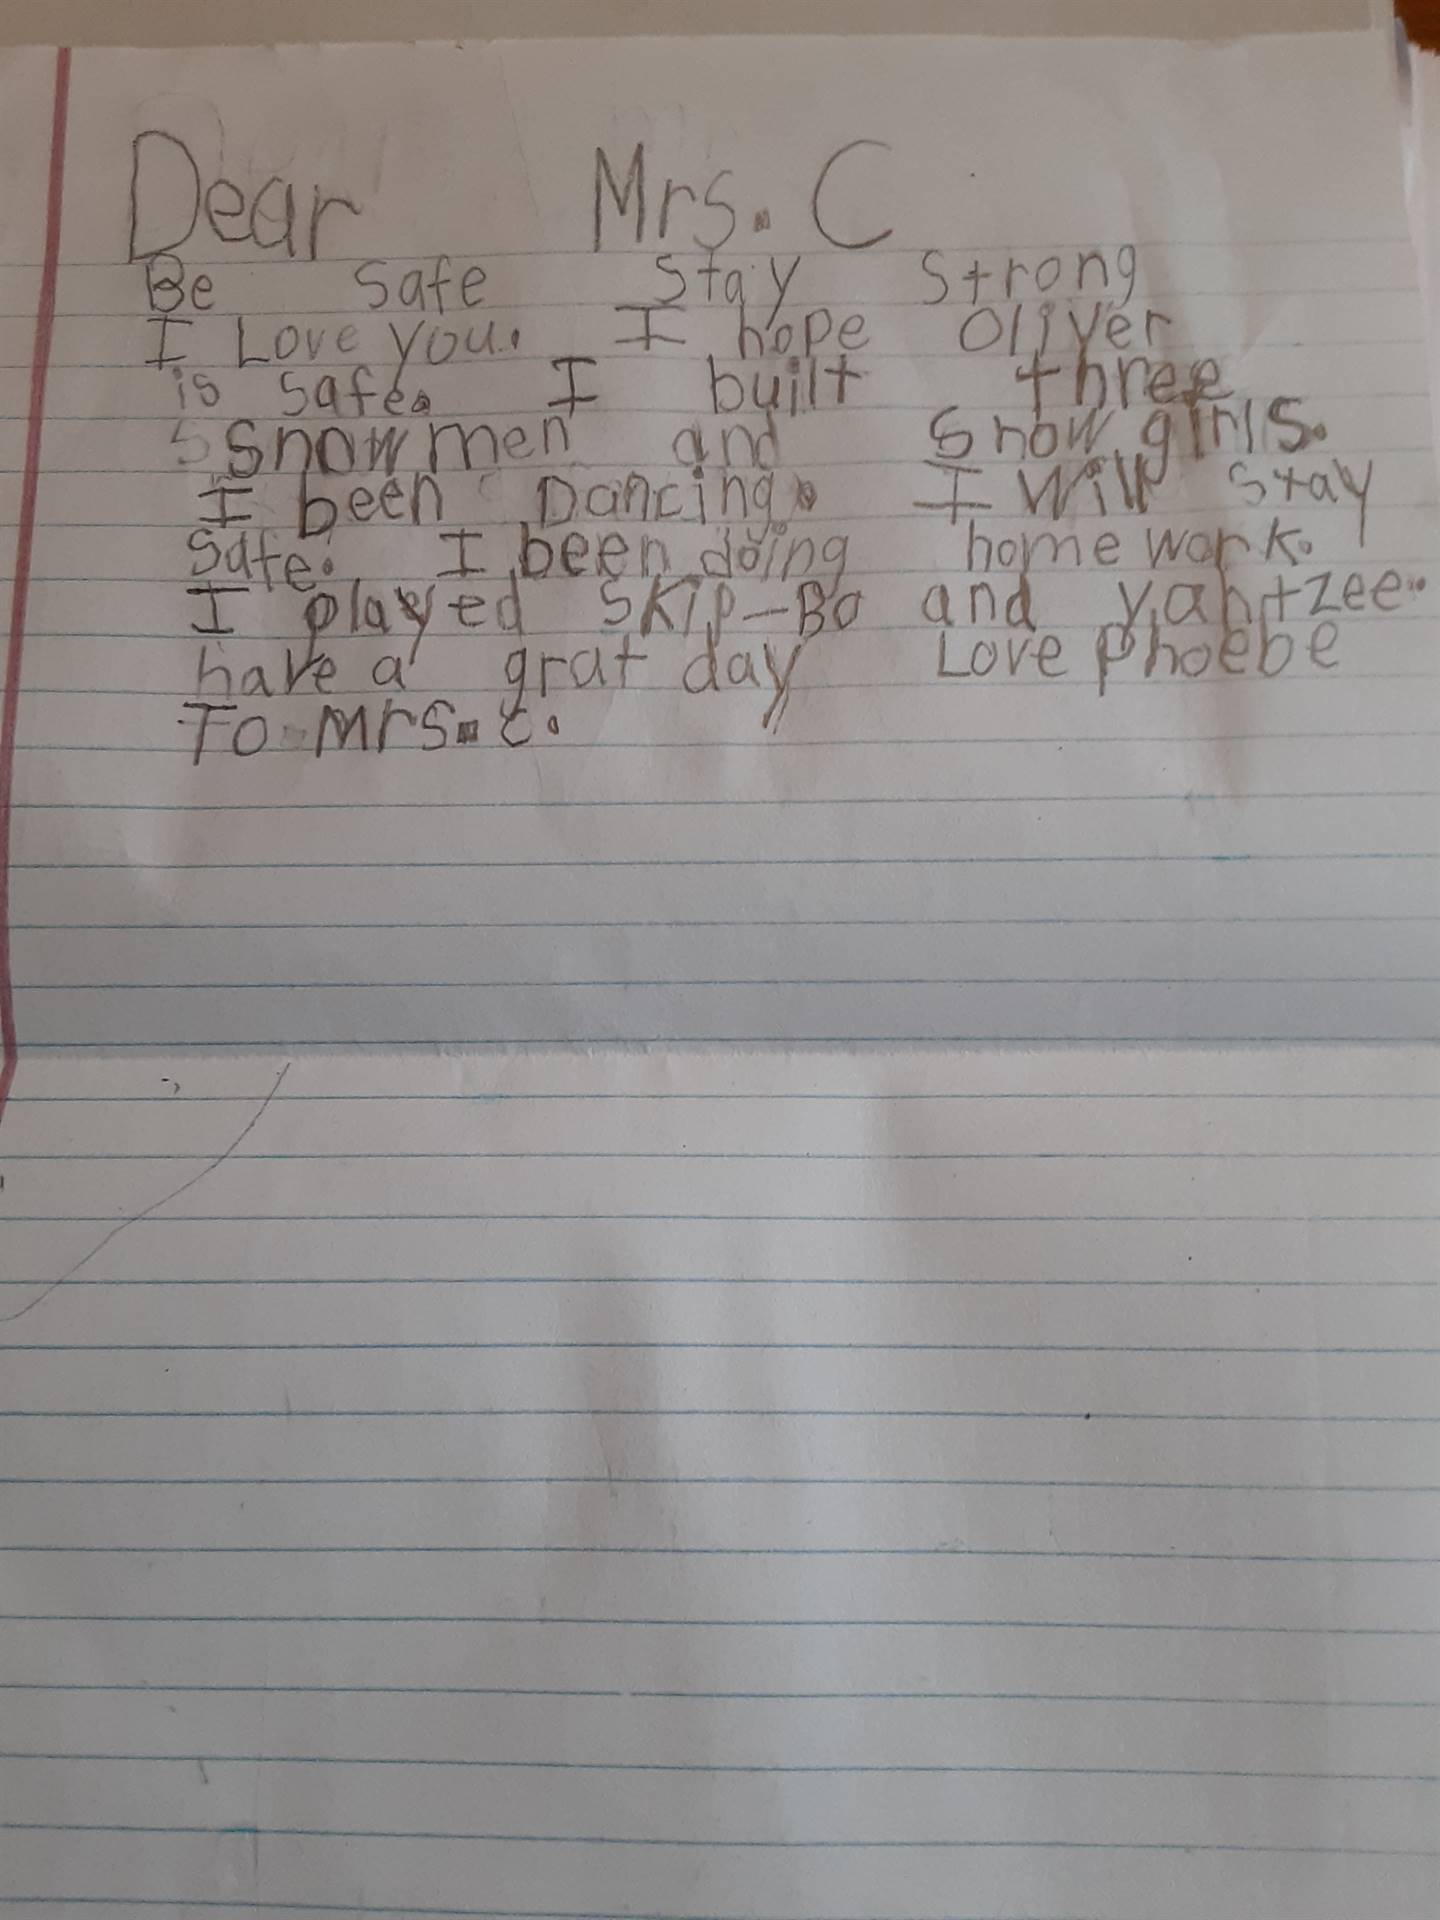 A letter from a child to her teacher.